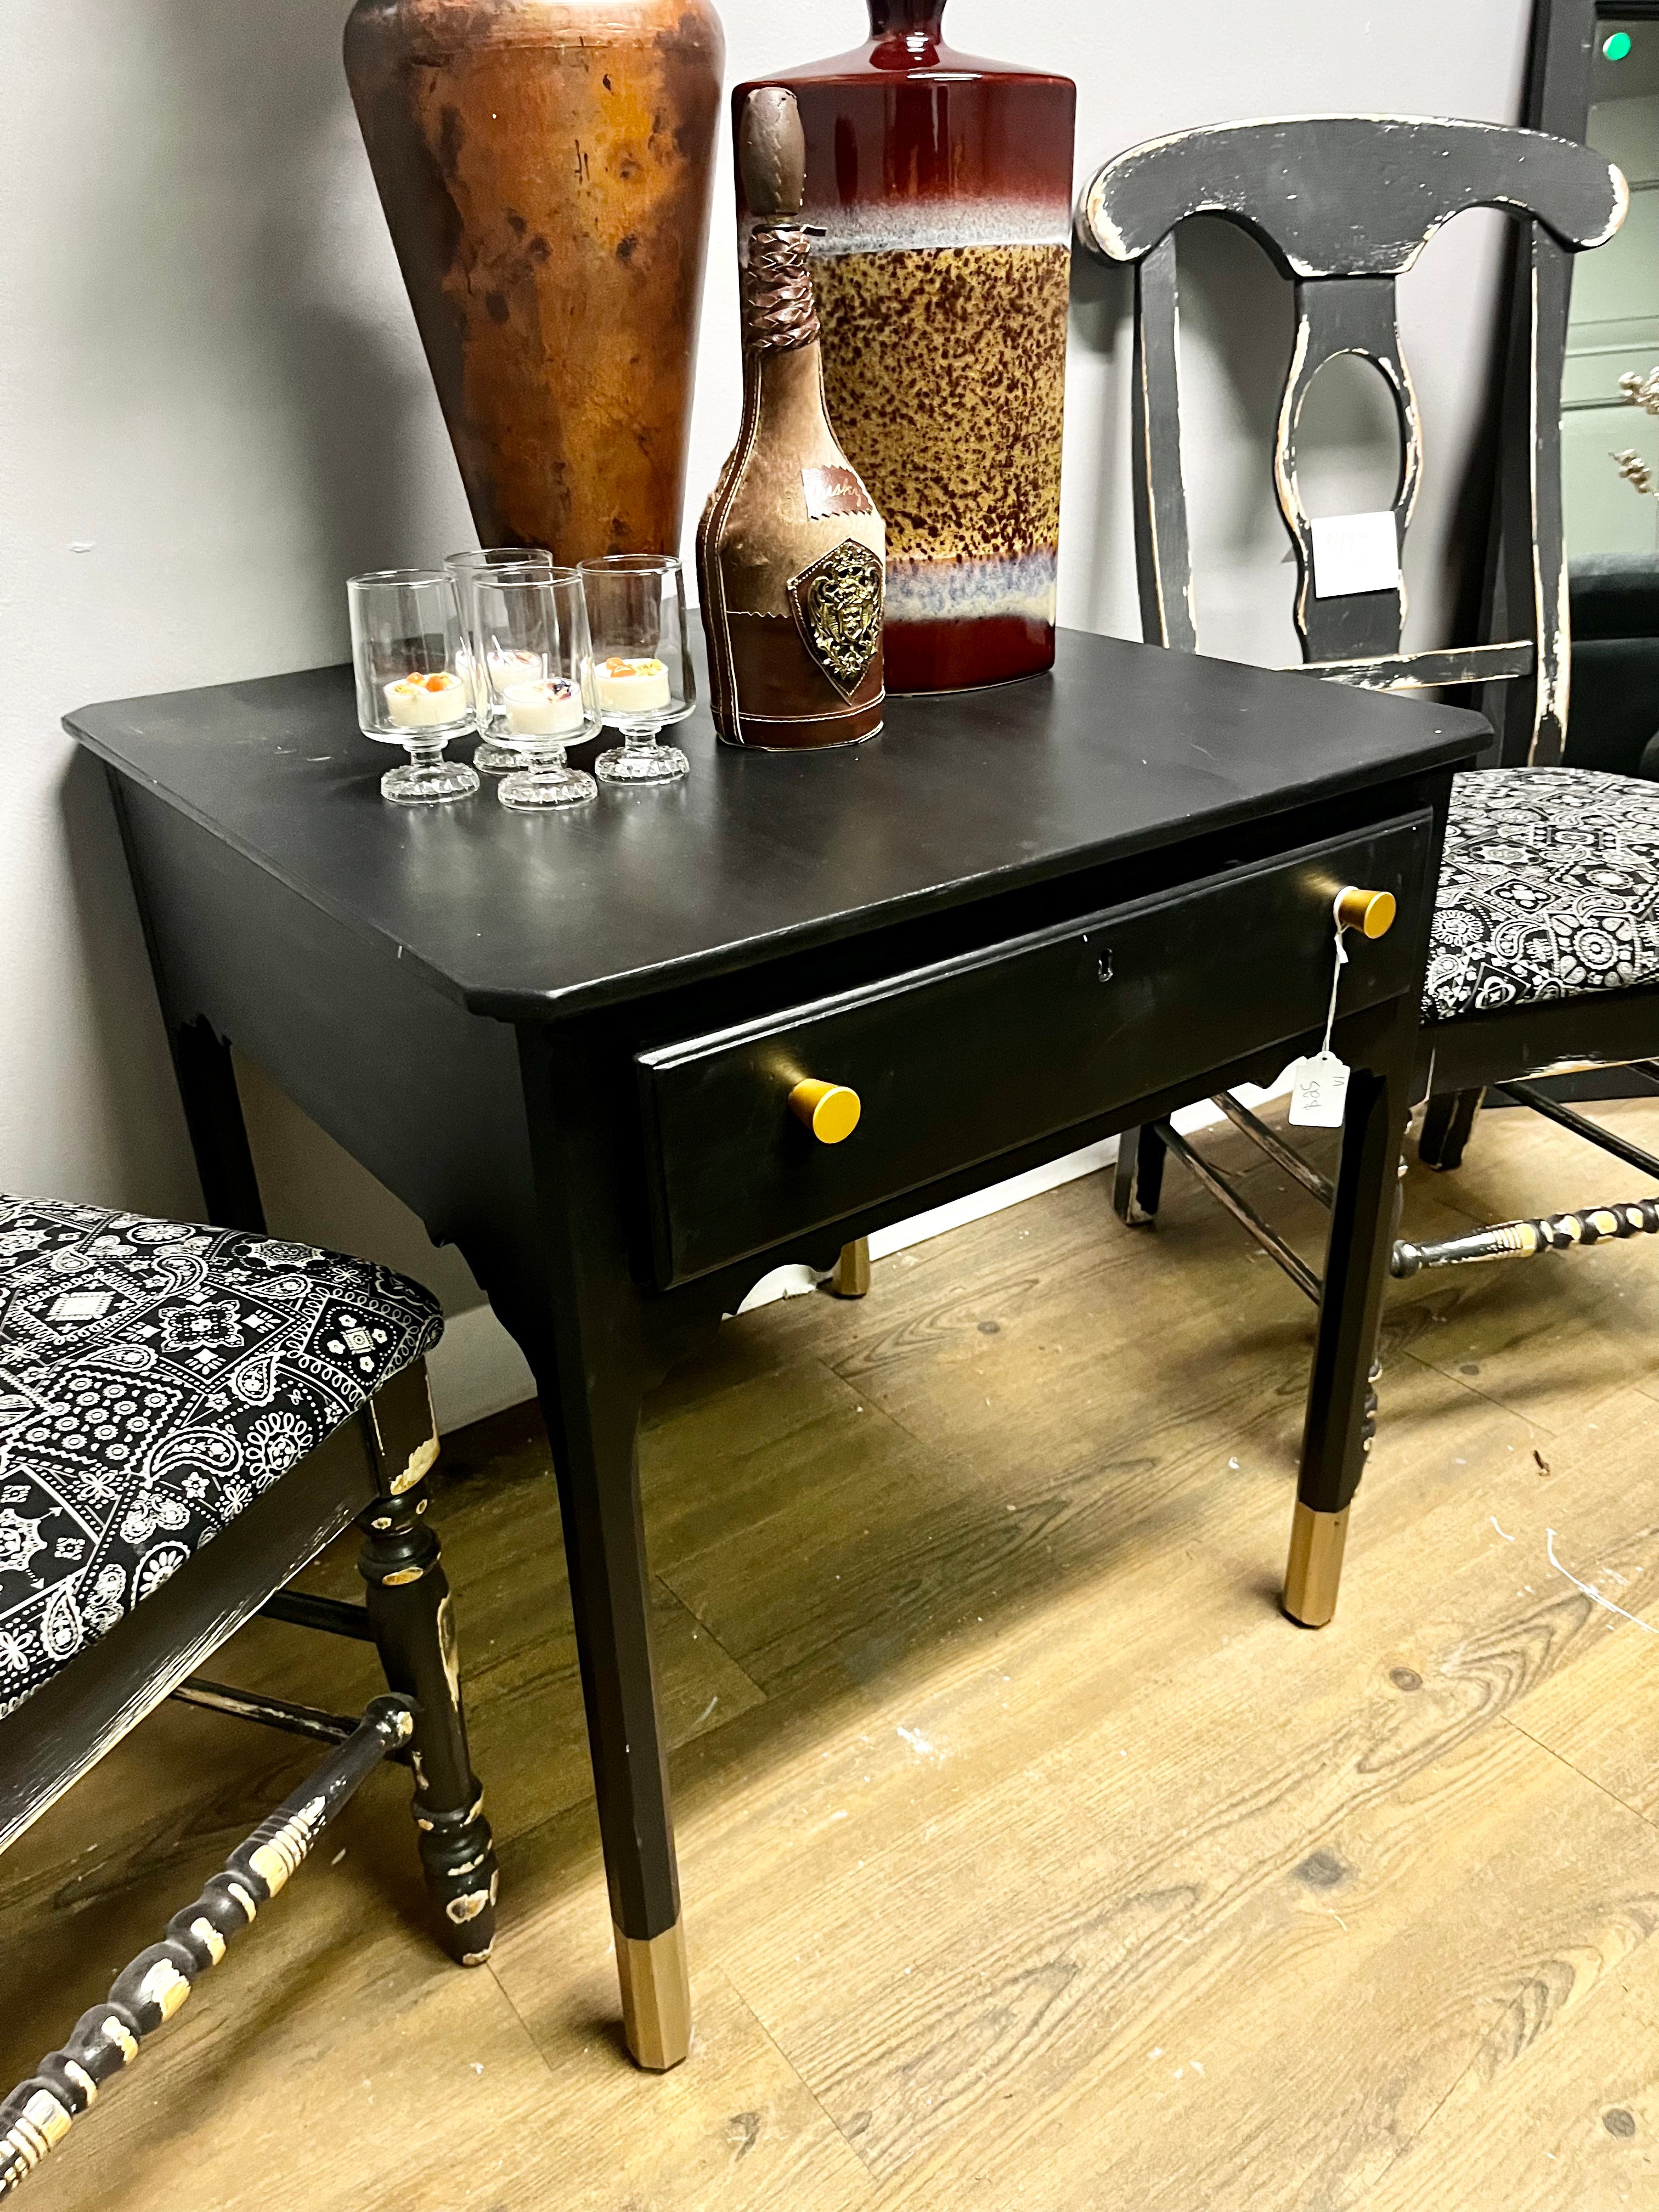 Black hand-painted side table with storage drawer